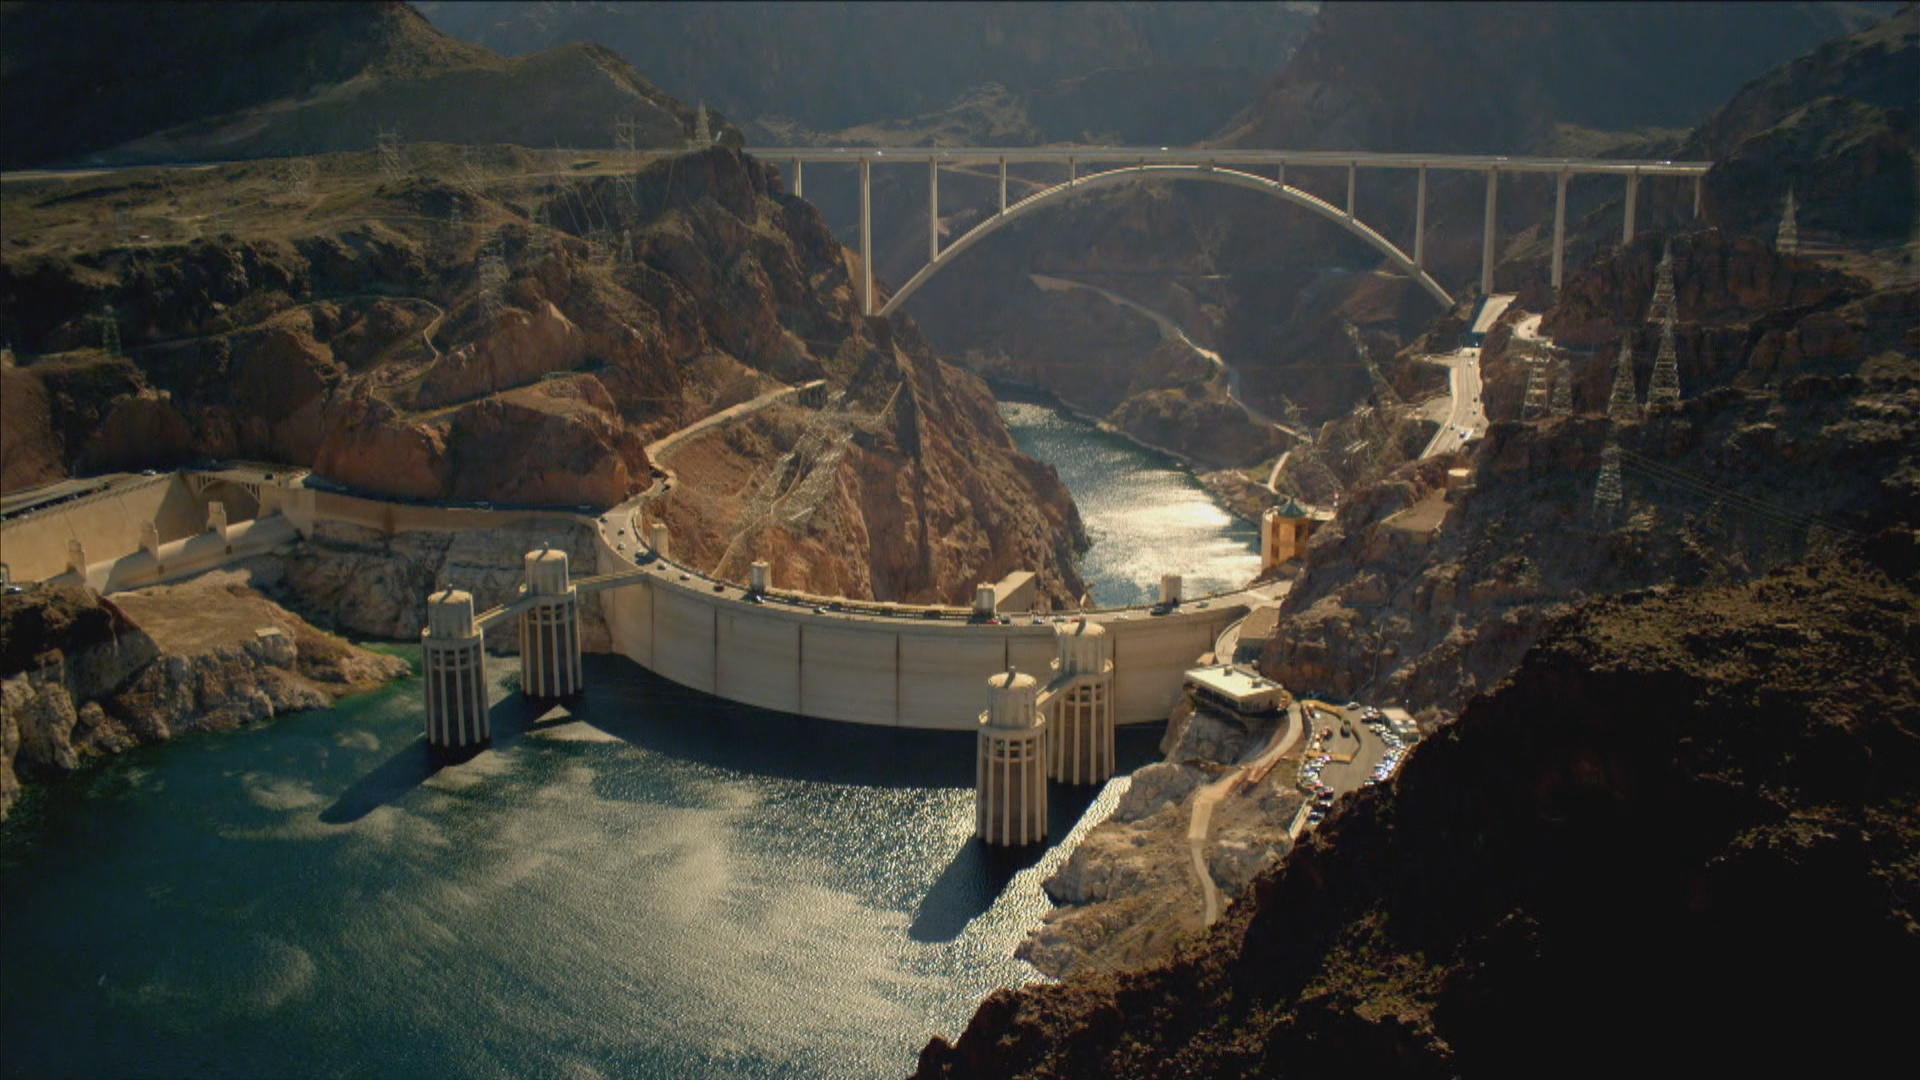 Dam: $3 billion project hopes to turn power plant into energy storage system - CBS